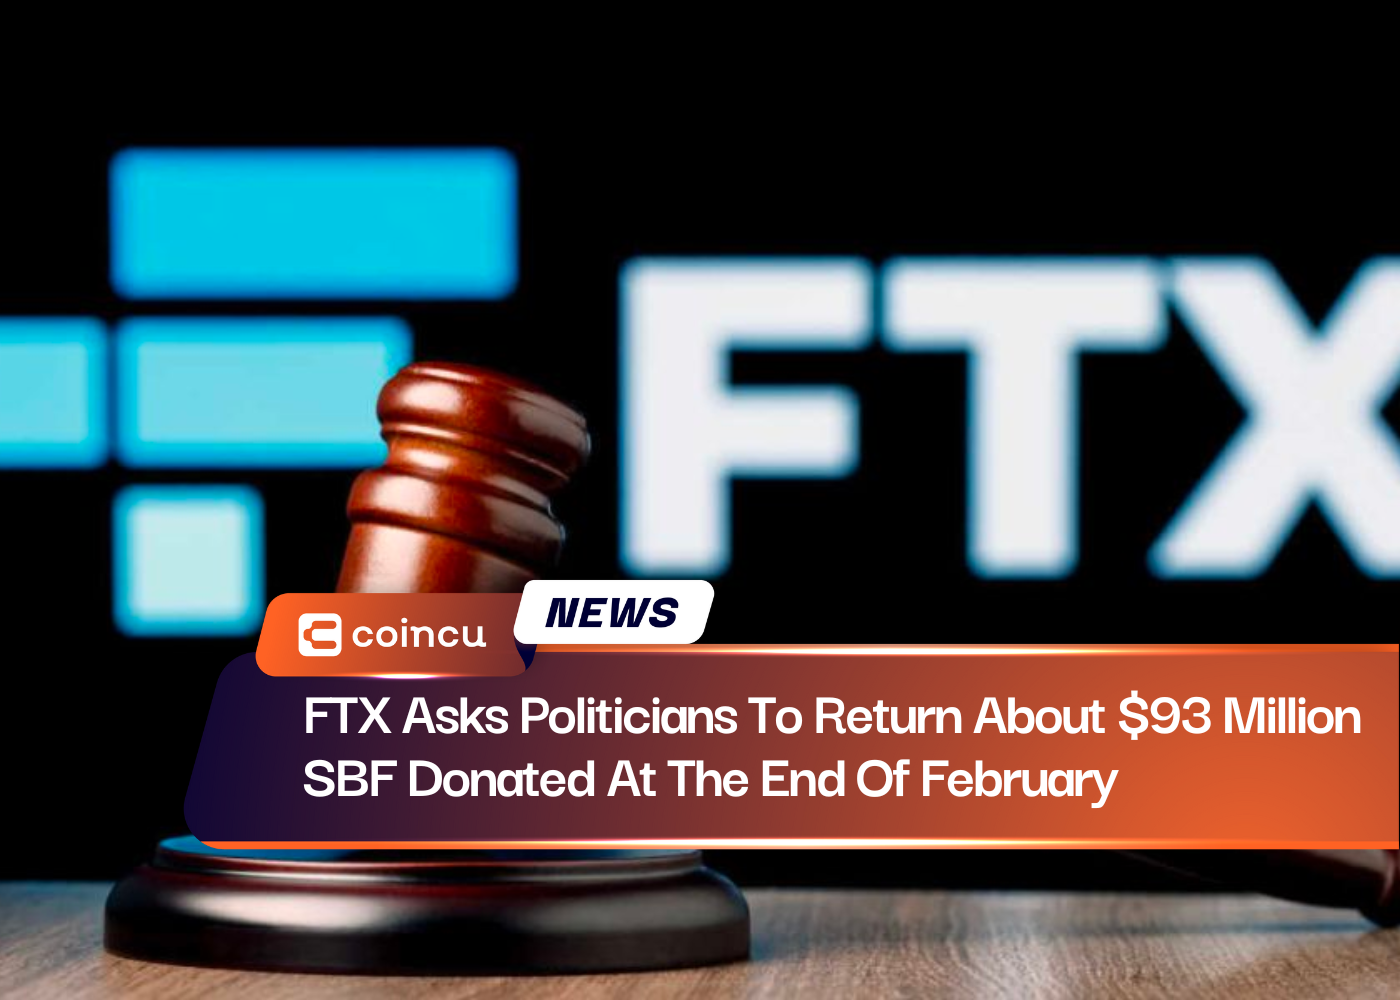 FTX Asks Politicians To Return About $93 Million SBF Donated At The End Of February